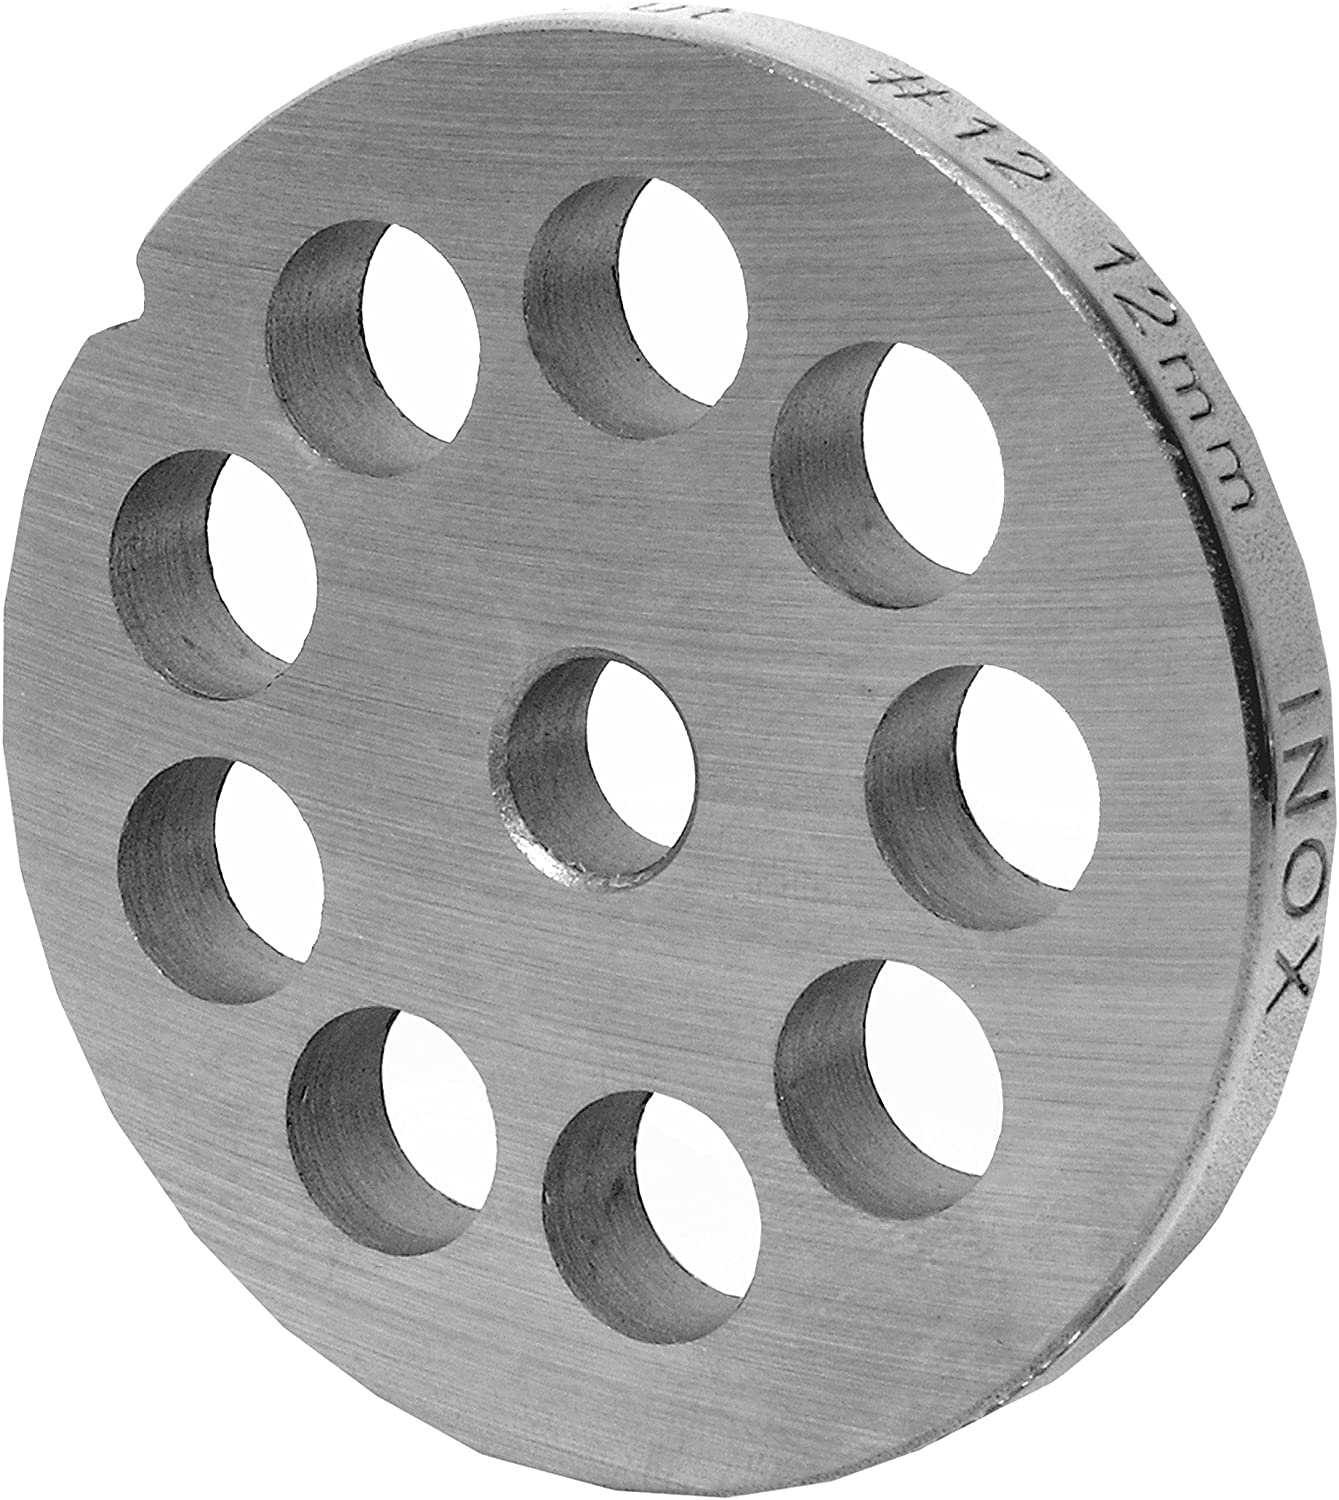 WolfCut Meat grinder discs suitable for Reber sizes 12 (12.0 mm)